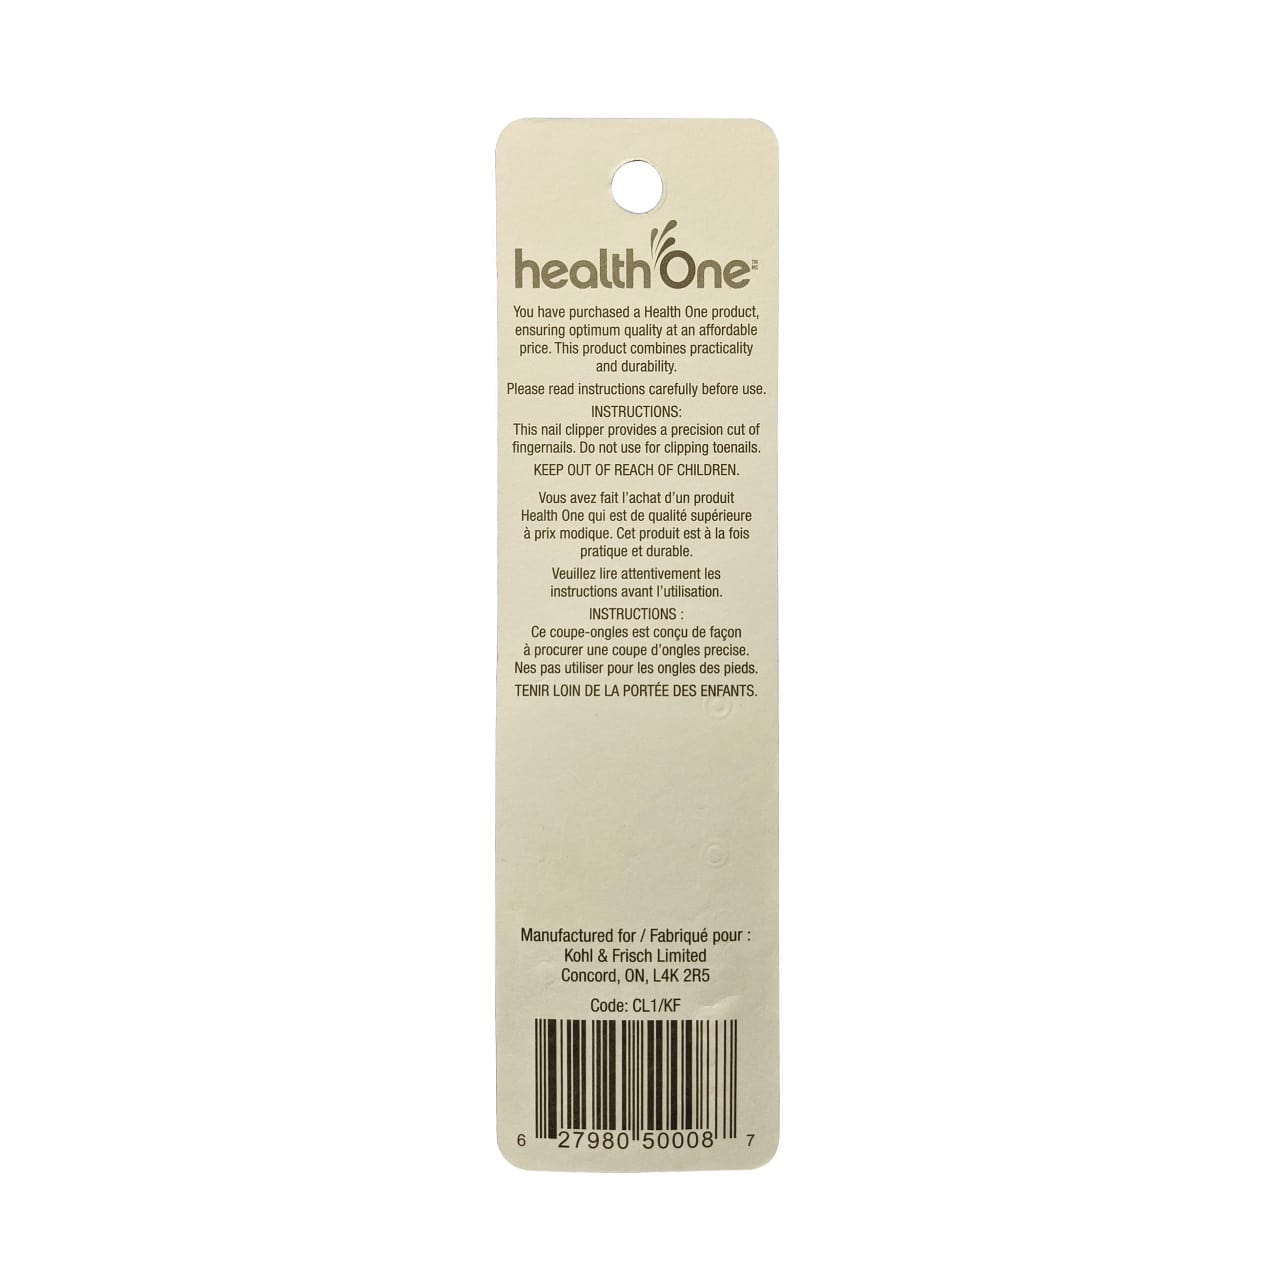 Description and instructions for health One Nail Clipper